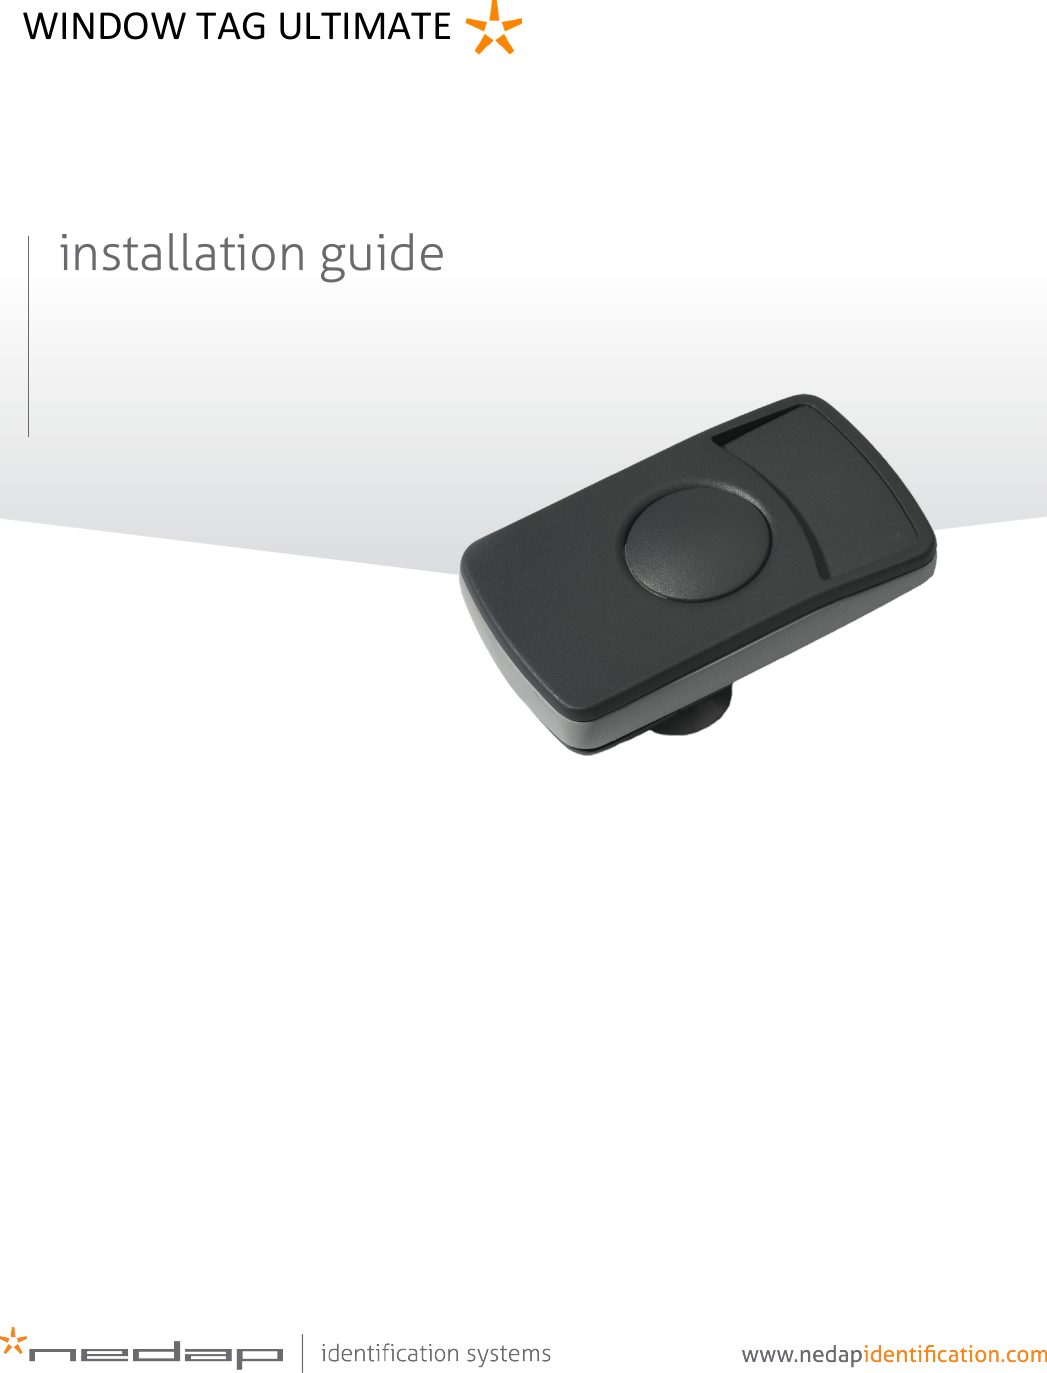         installation guide      WINDOW TAG ULTIMATE